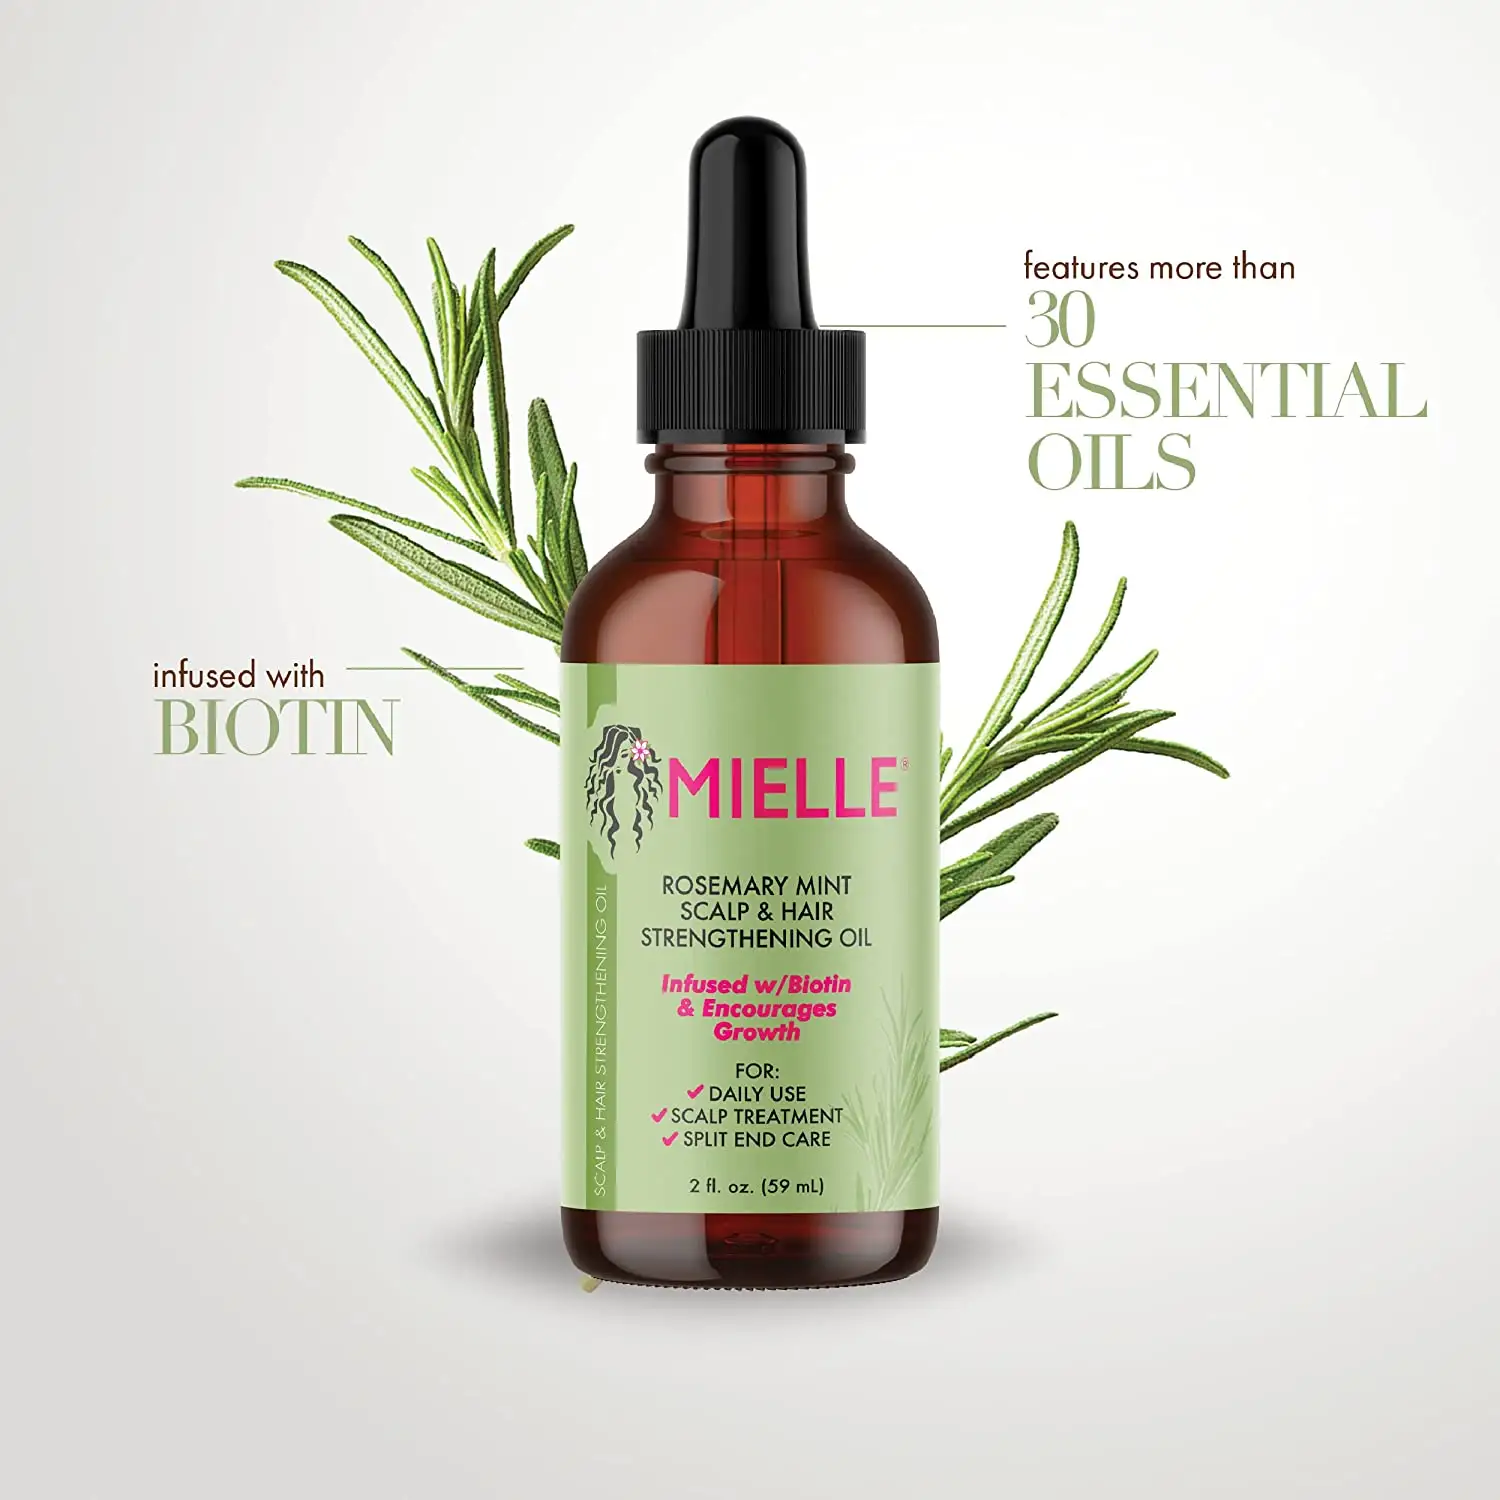 Popular MIELLE rosemary mint Natural Organic Mielle Oil hair products Biotin Collagen Rosemary Mint OEM Shampoo